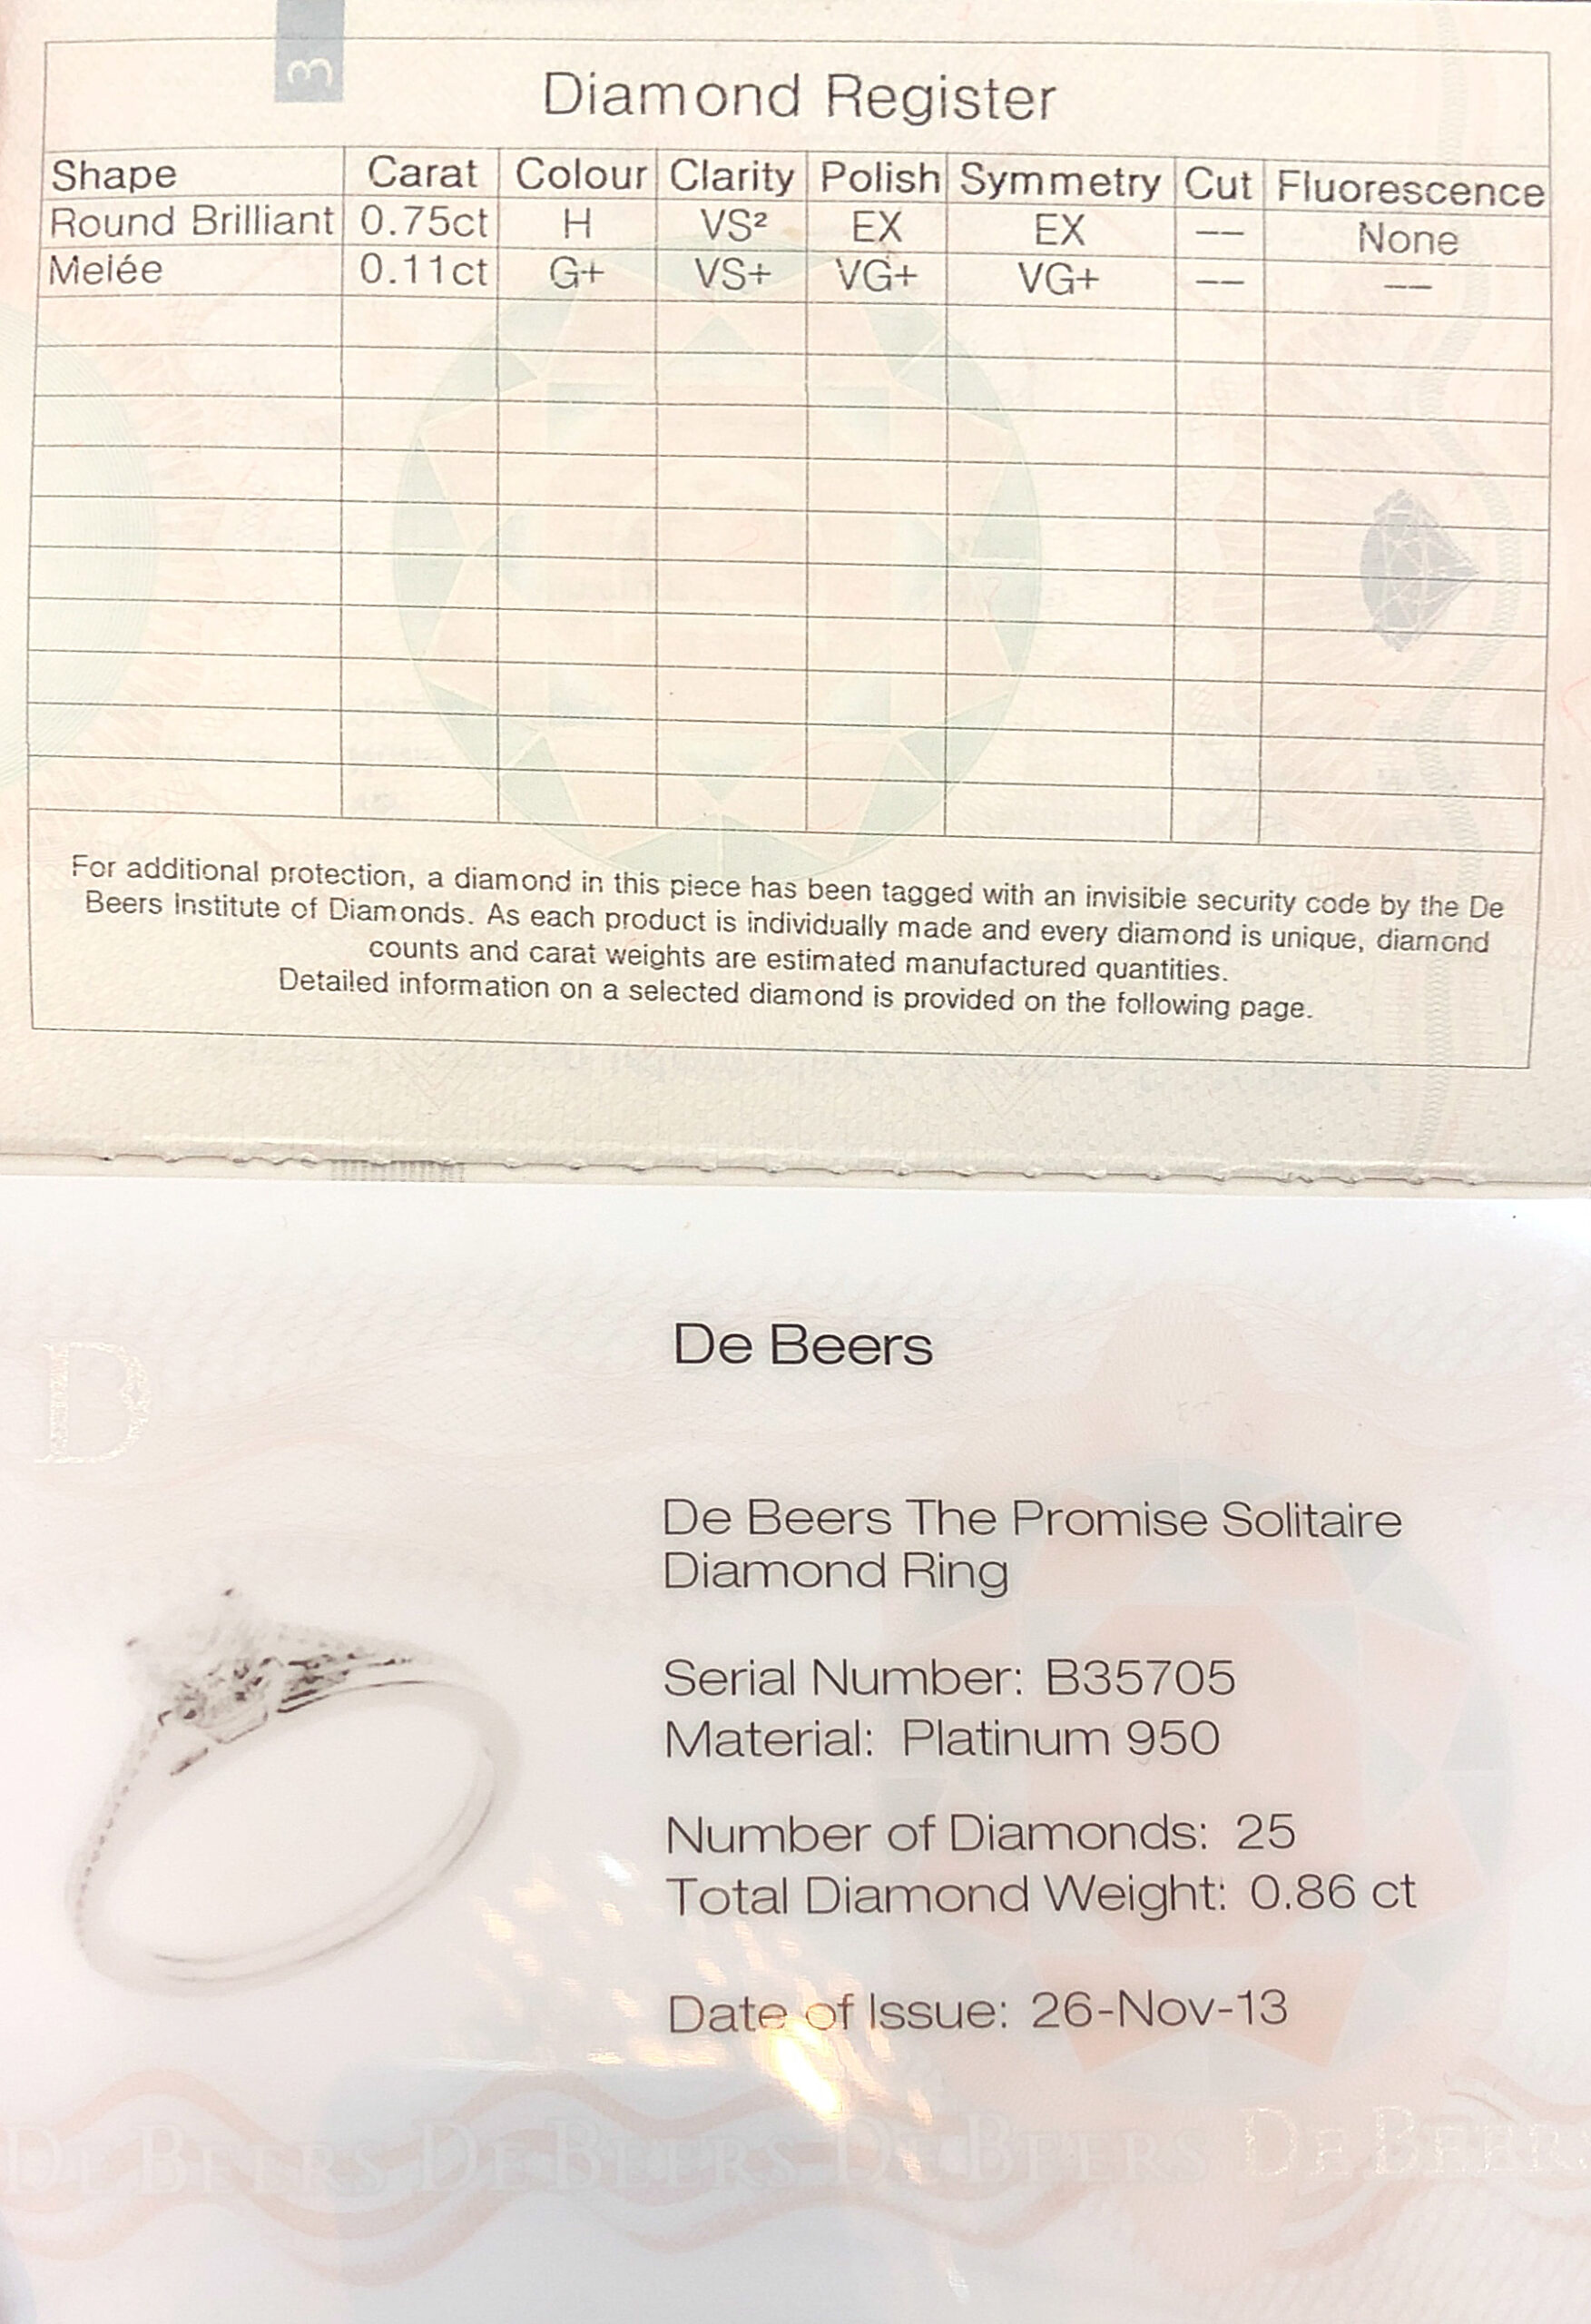 De Beers, Circa Team Up to Screen Pre-Owned Diamonds